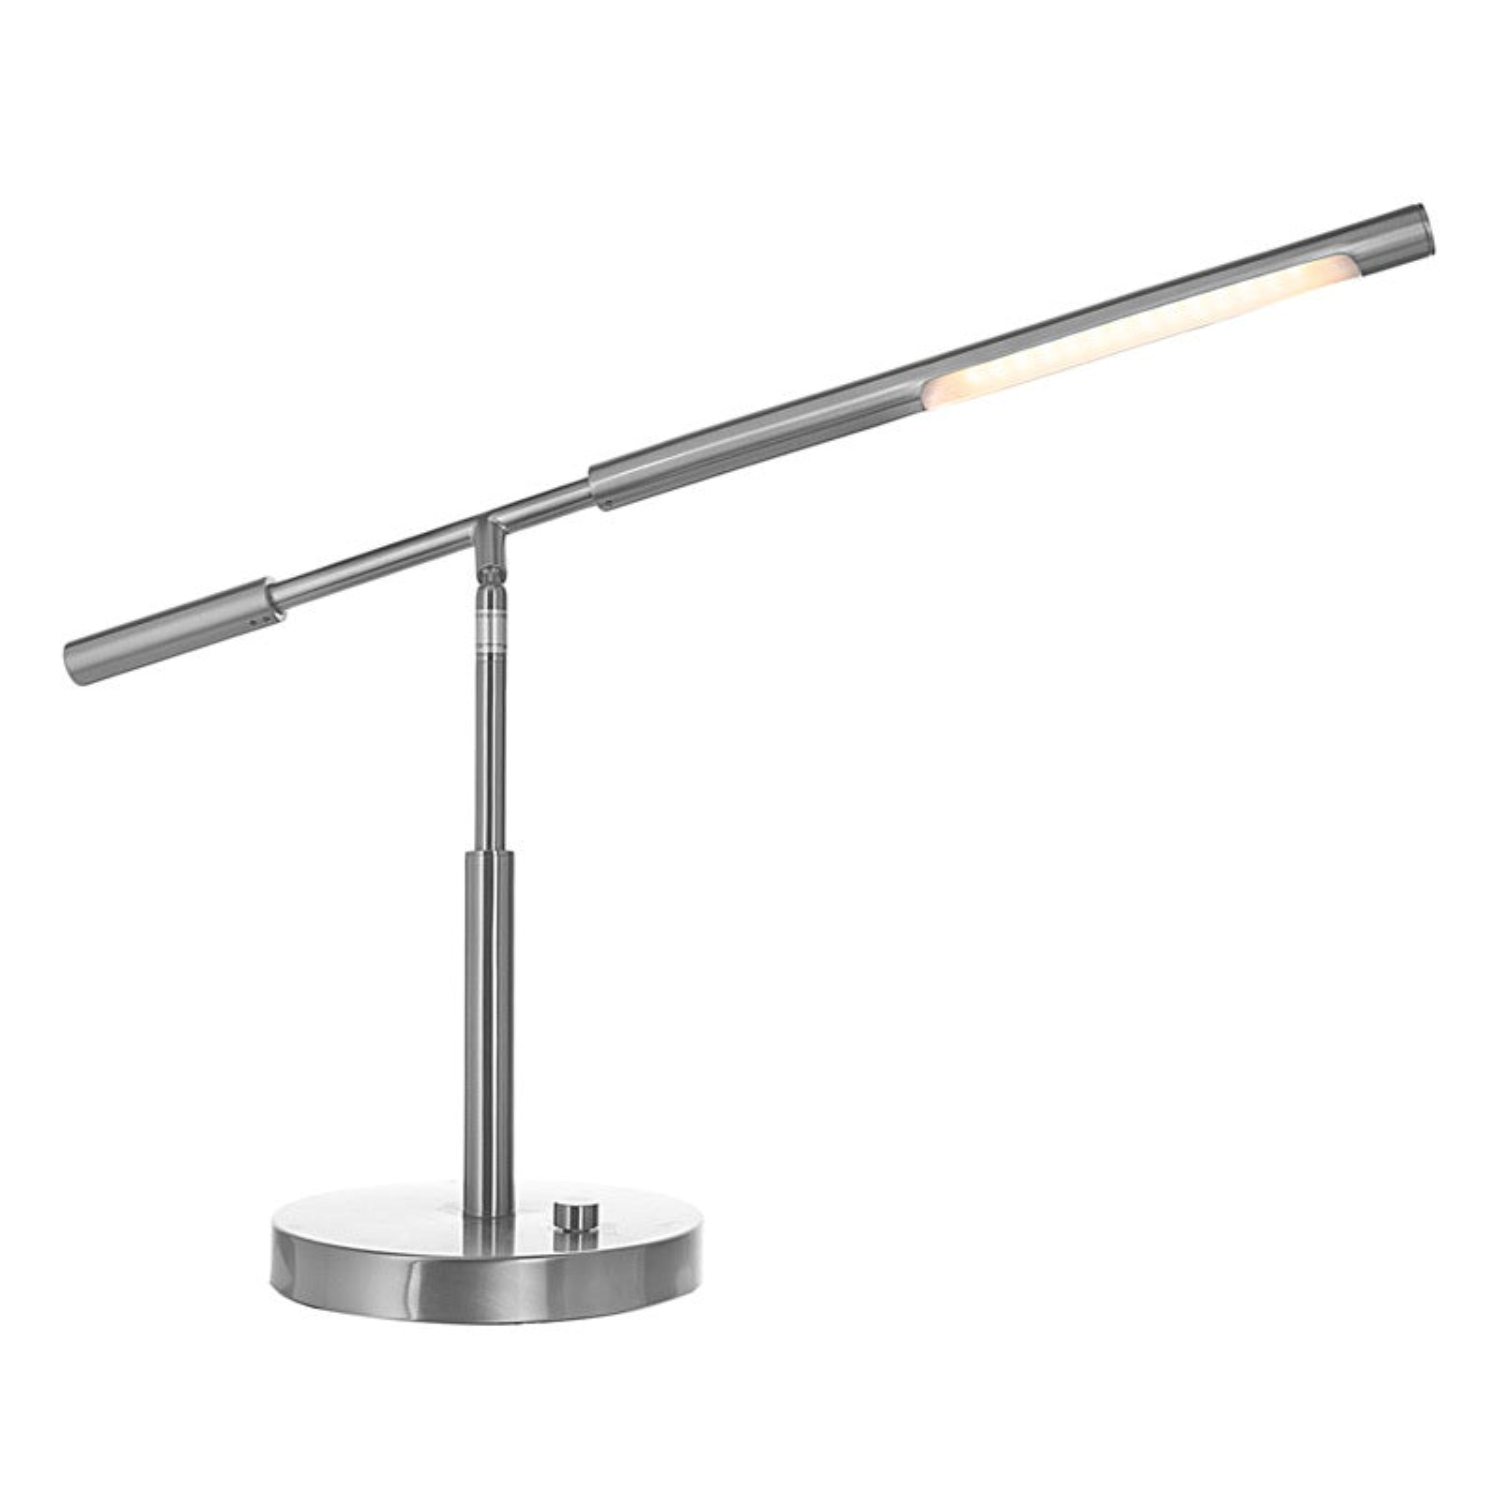 Cayden Desk Lamp Picture with White Background